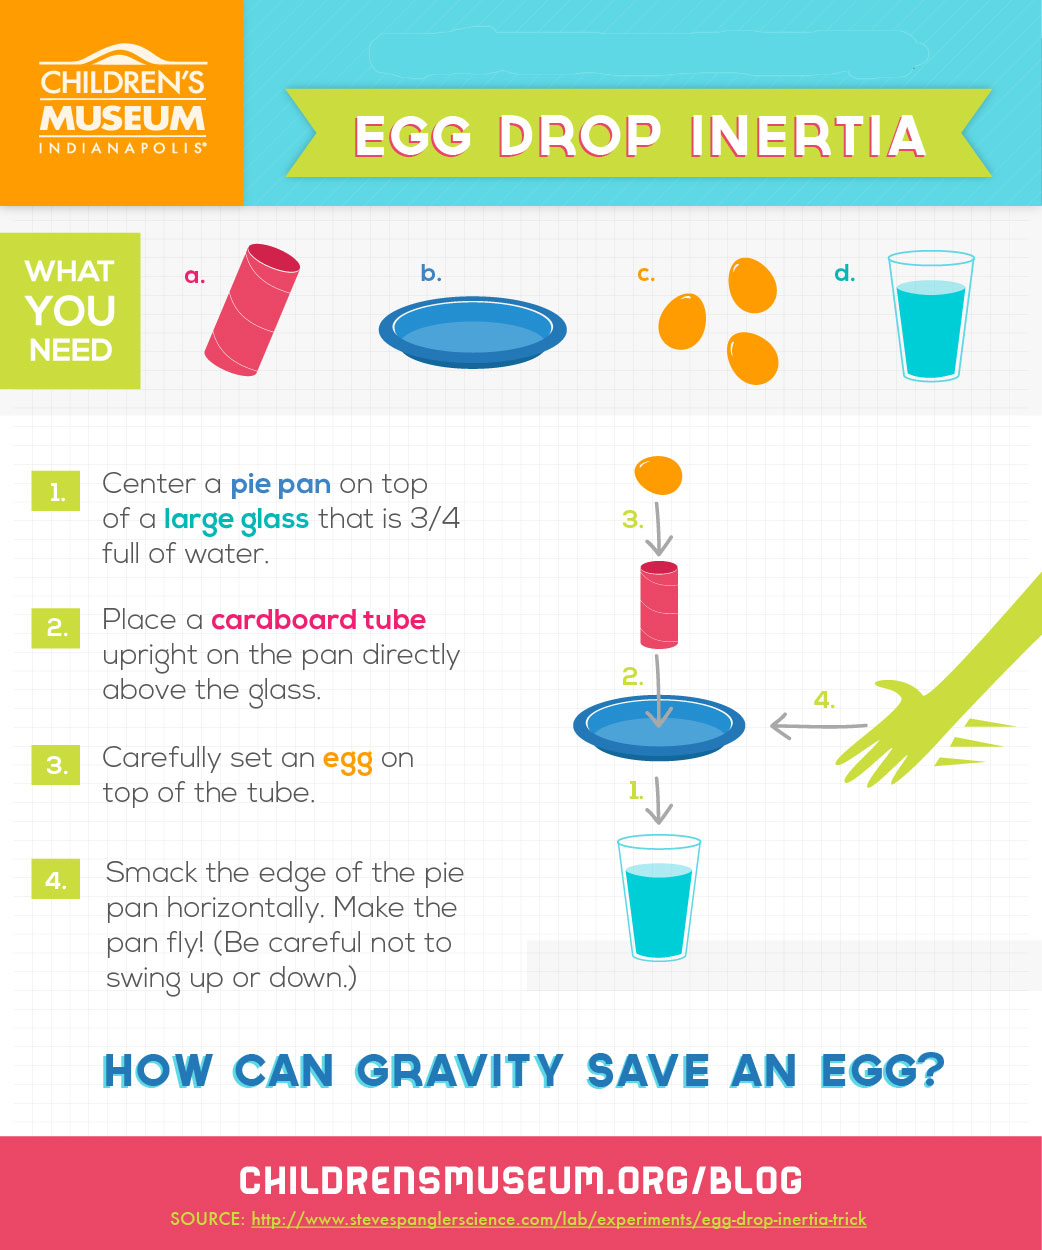 Egg Drop Inertia science experiment for Museum at Home with The Children's Museum of Indianapolis